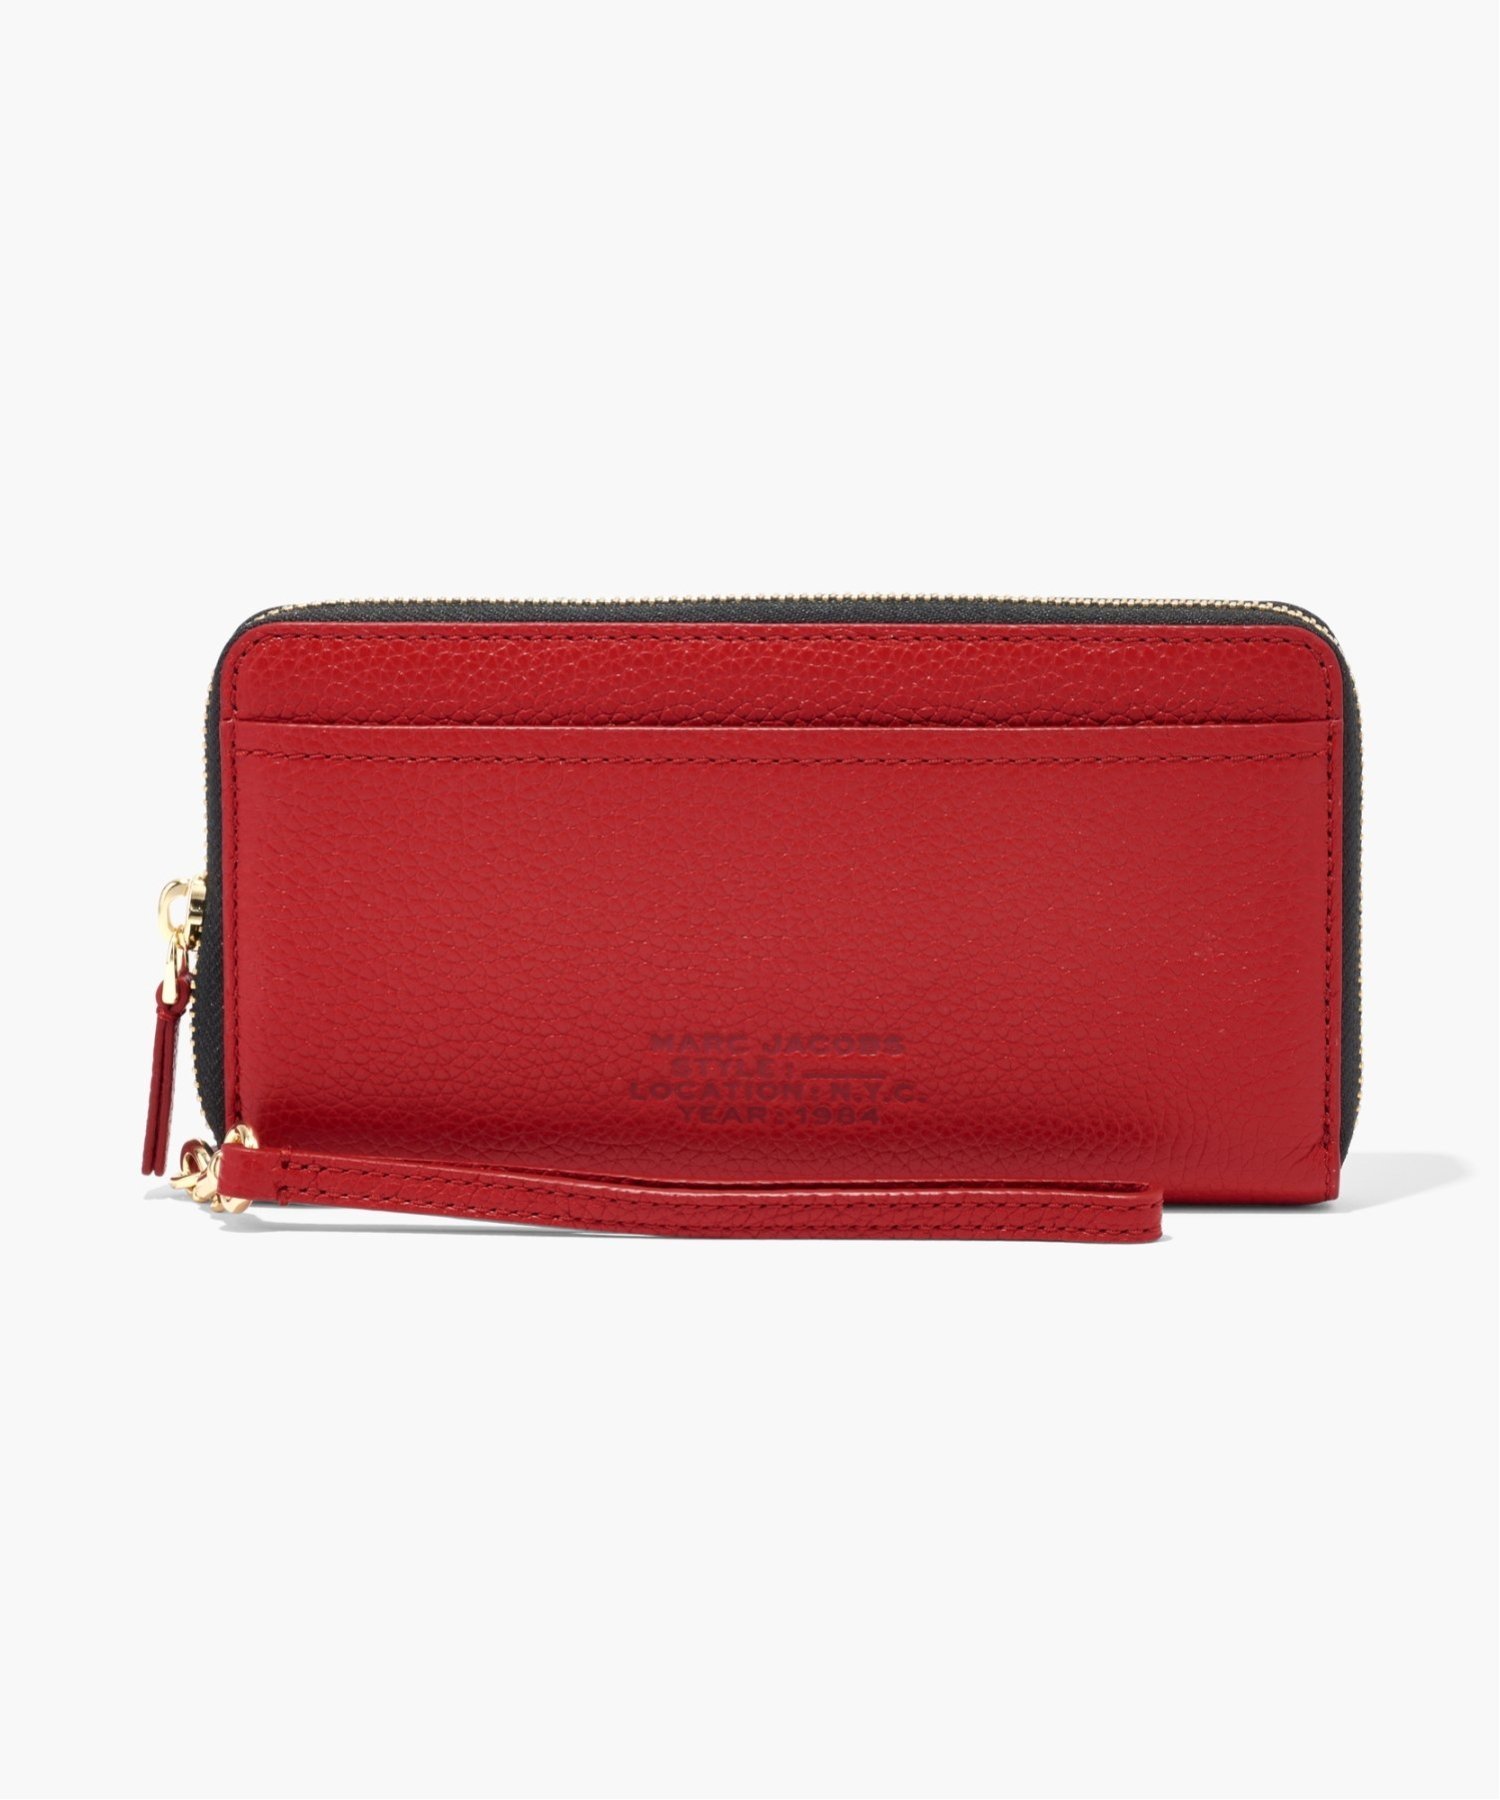 Marc Jacobs Red Continental Wristlet Wallet 財布-